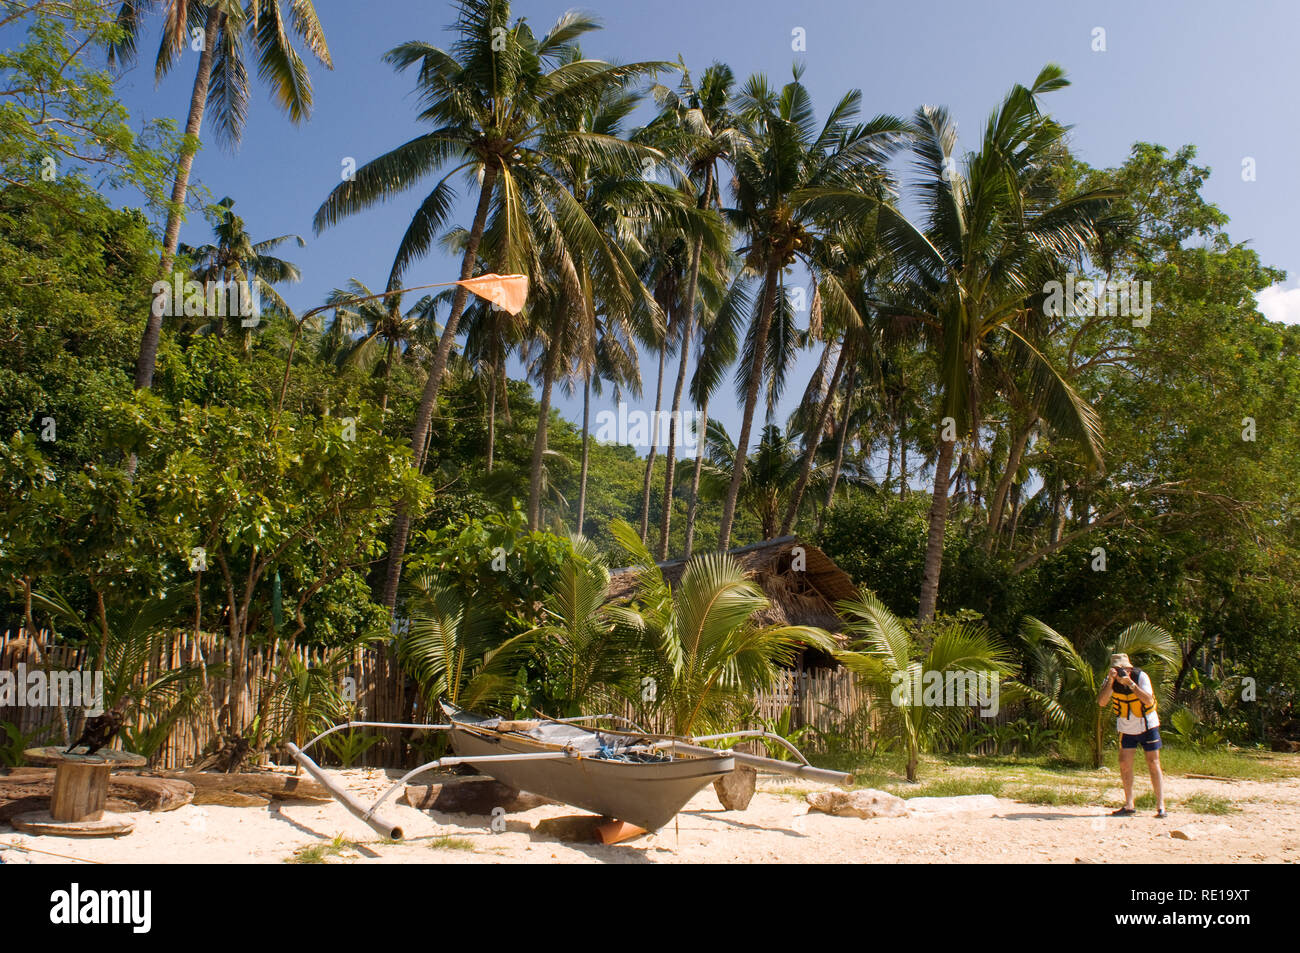 Tourist and a boat moored in the white sand of the island of Comocutuan. Palawan Philippines Stock Photo